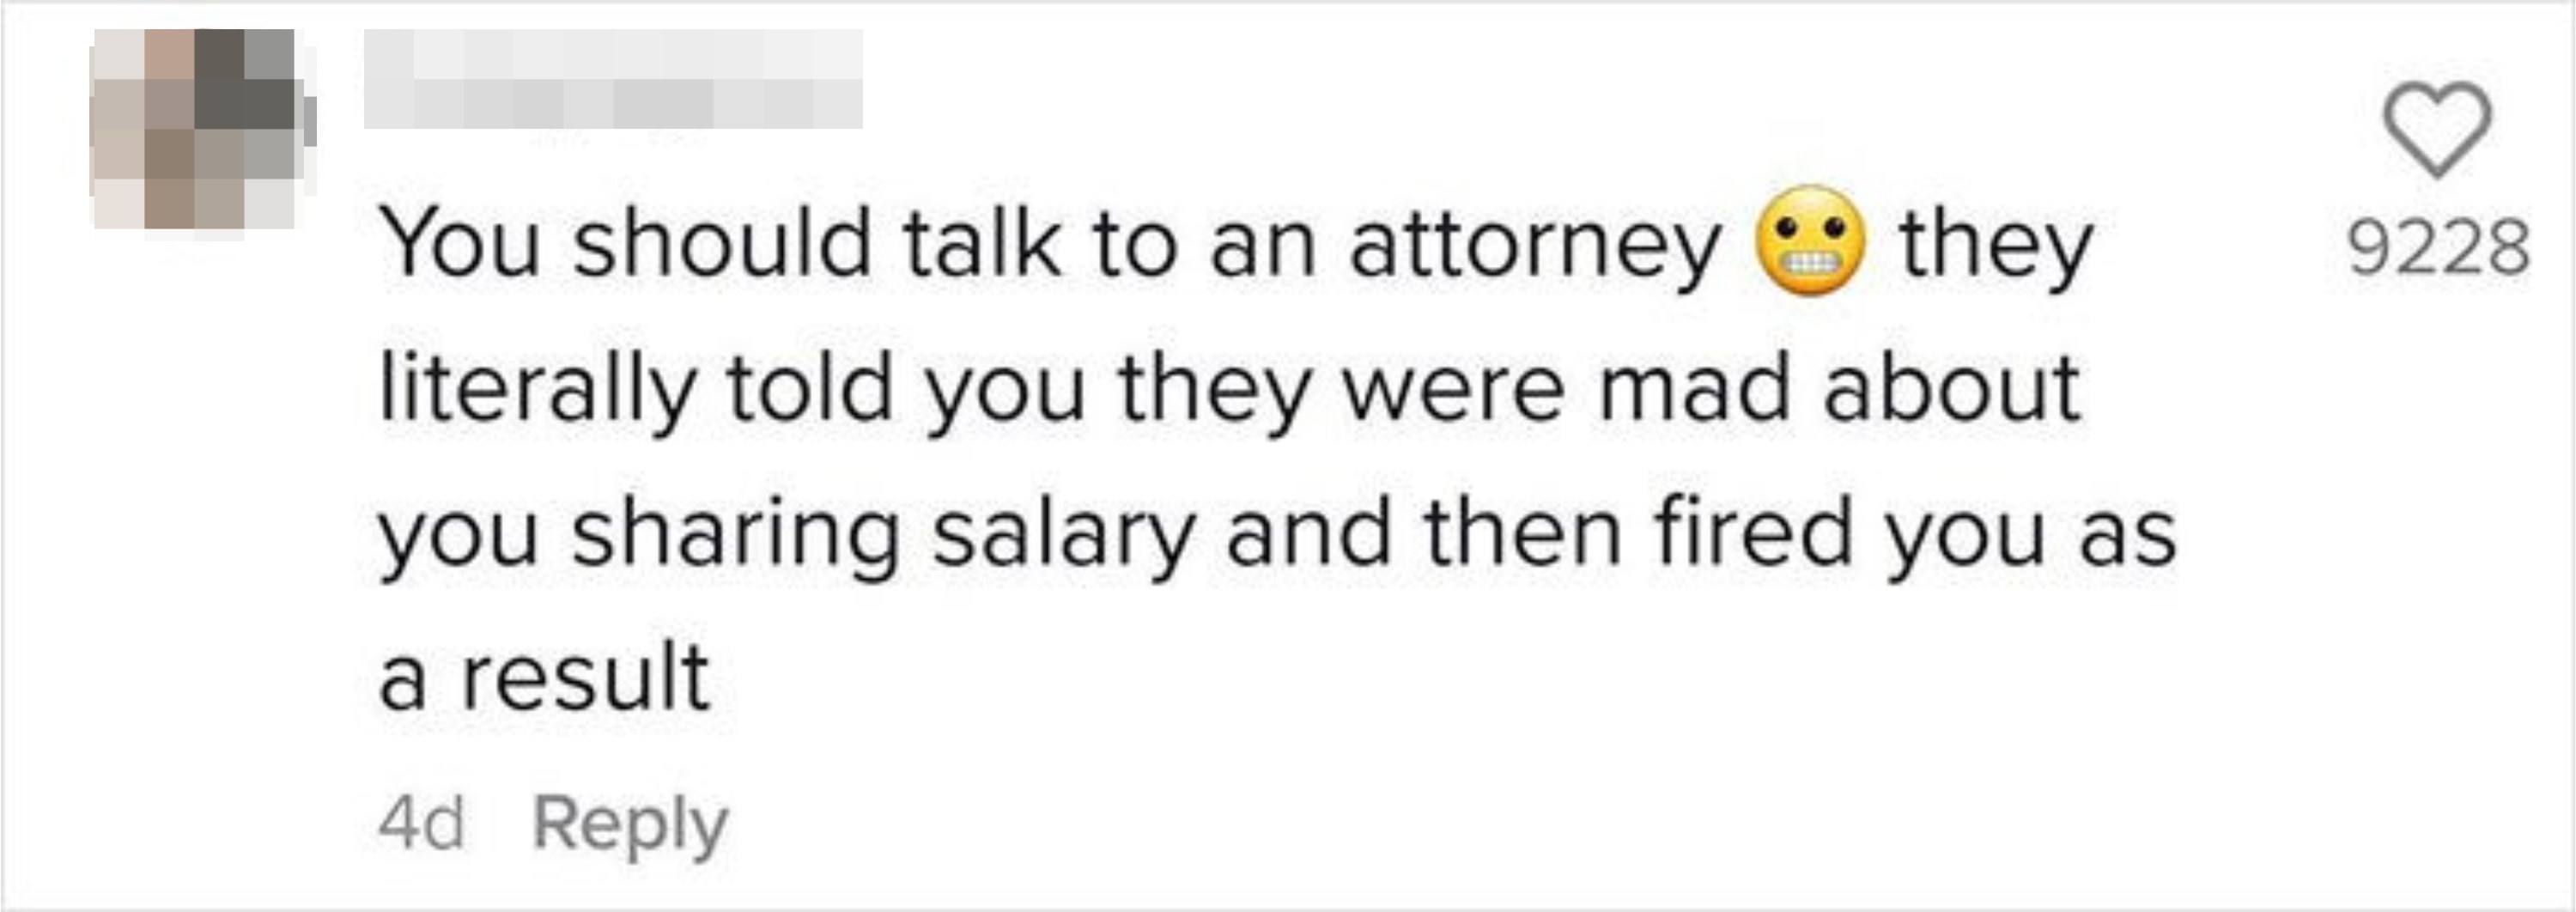 You should talk to an attorney they literally told you they were mad about you sharing salary and then fired you as a result